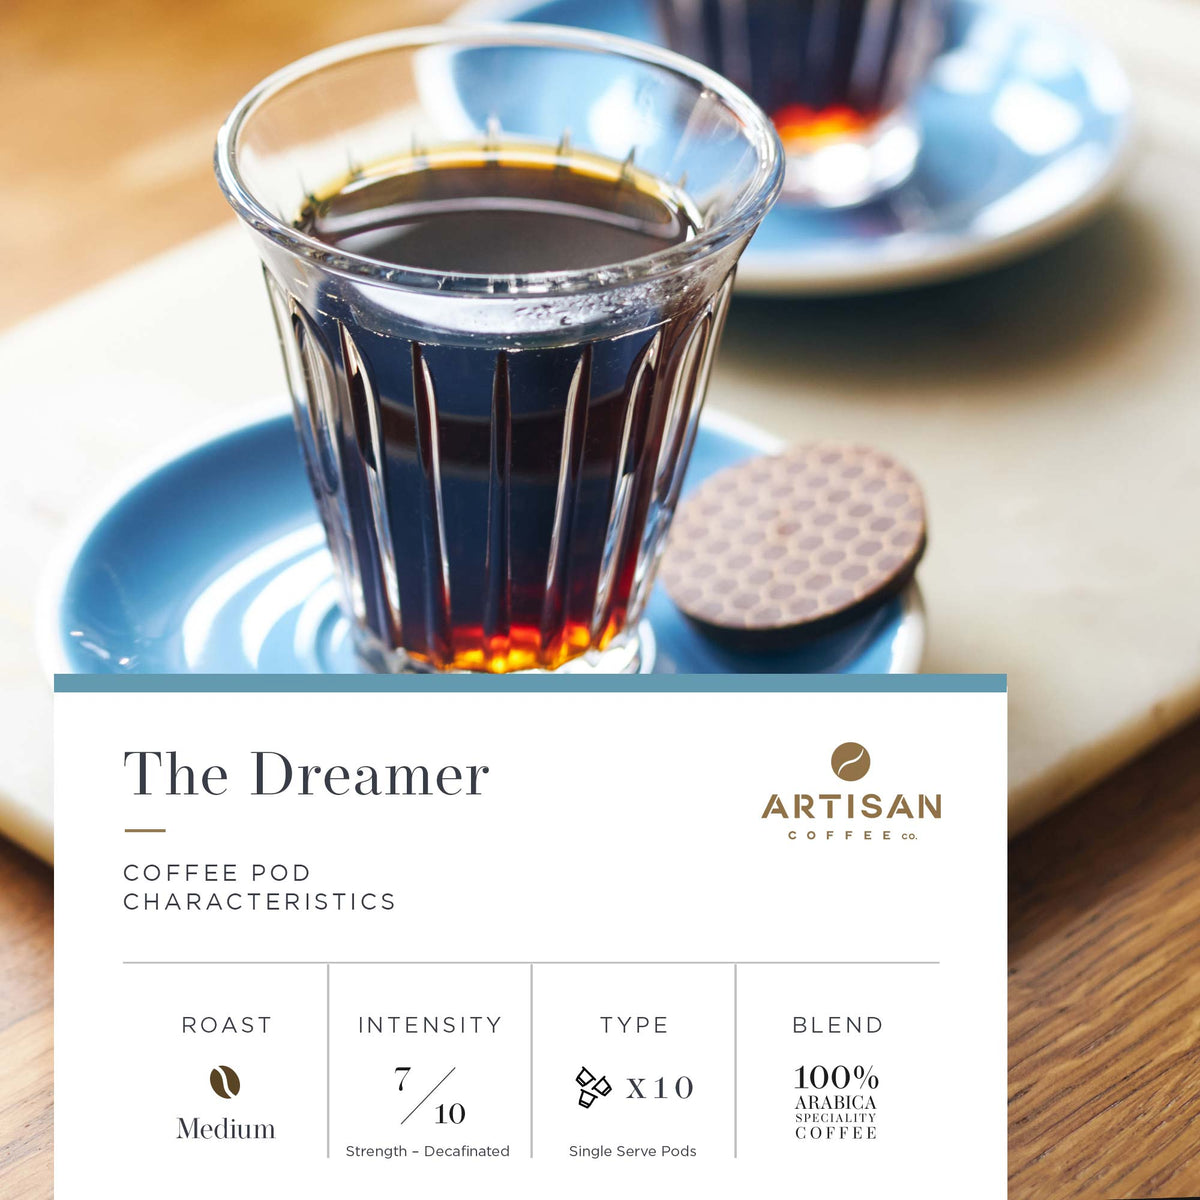 Artisan Coffee Co The Dreamer Pods Infographic Characteristics